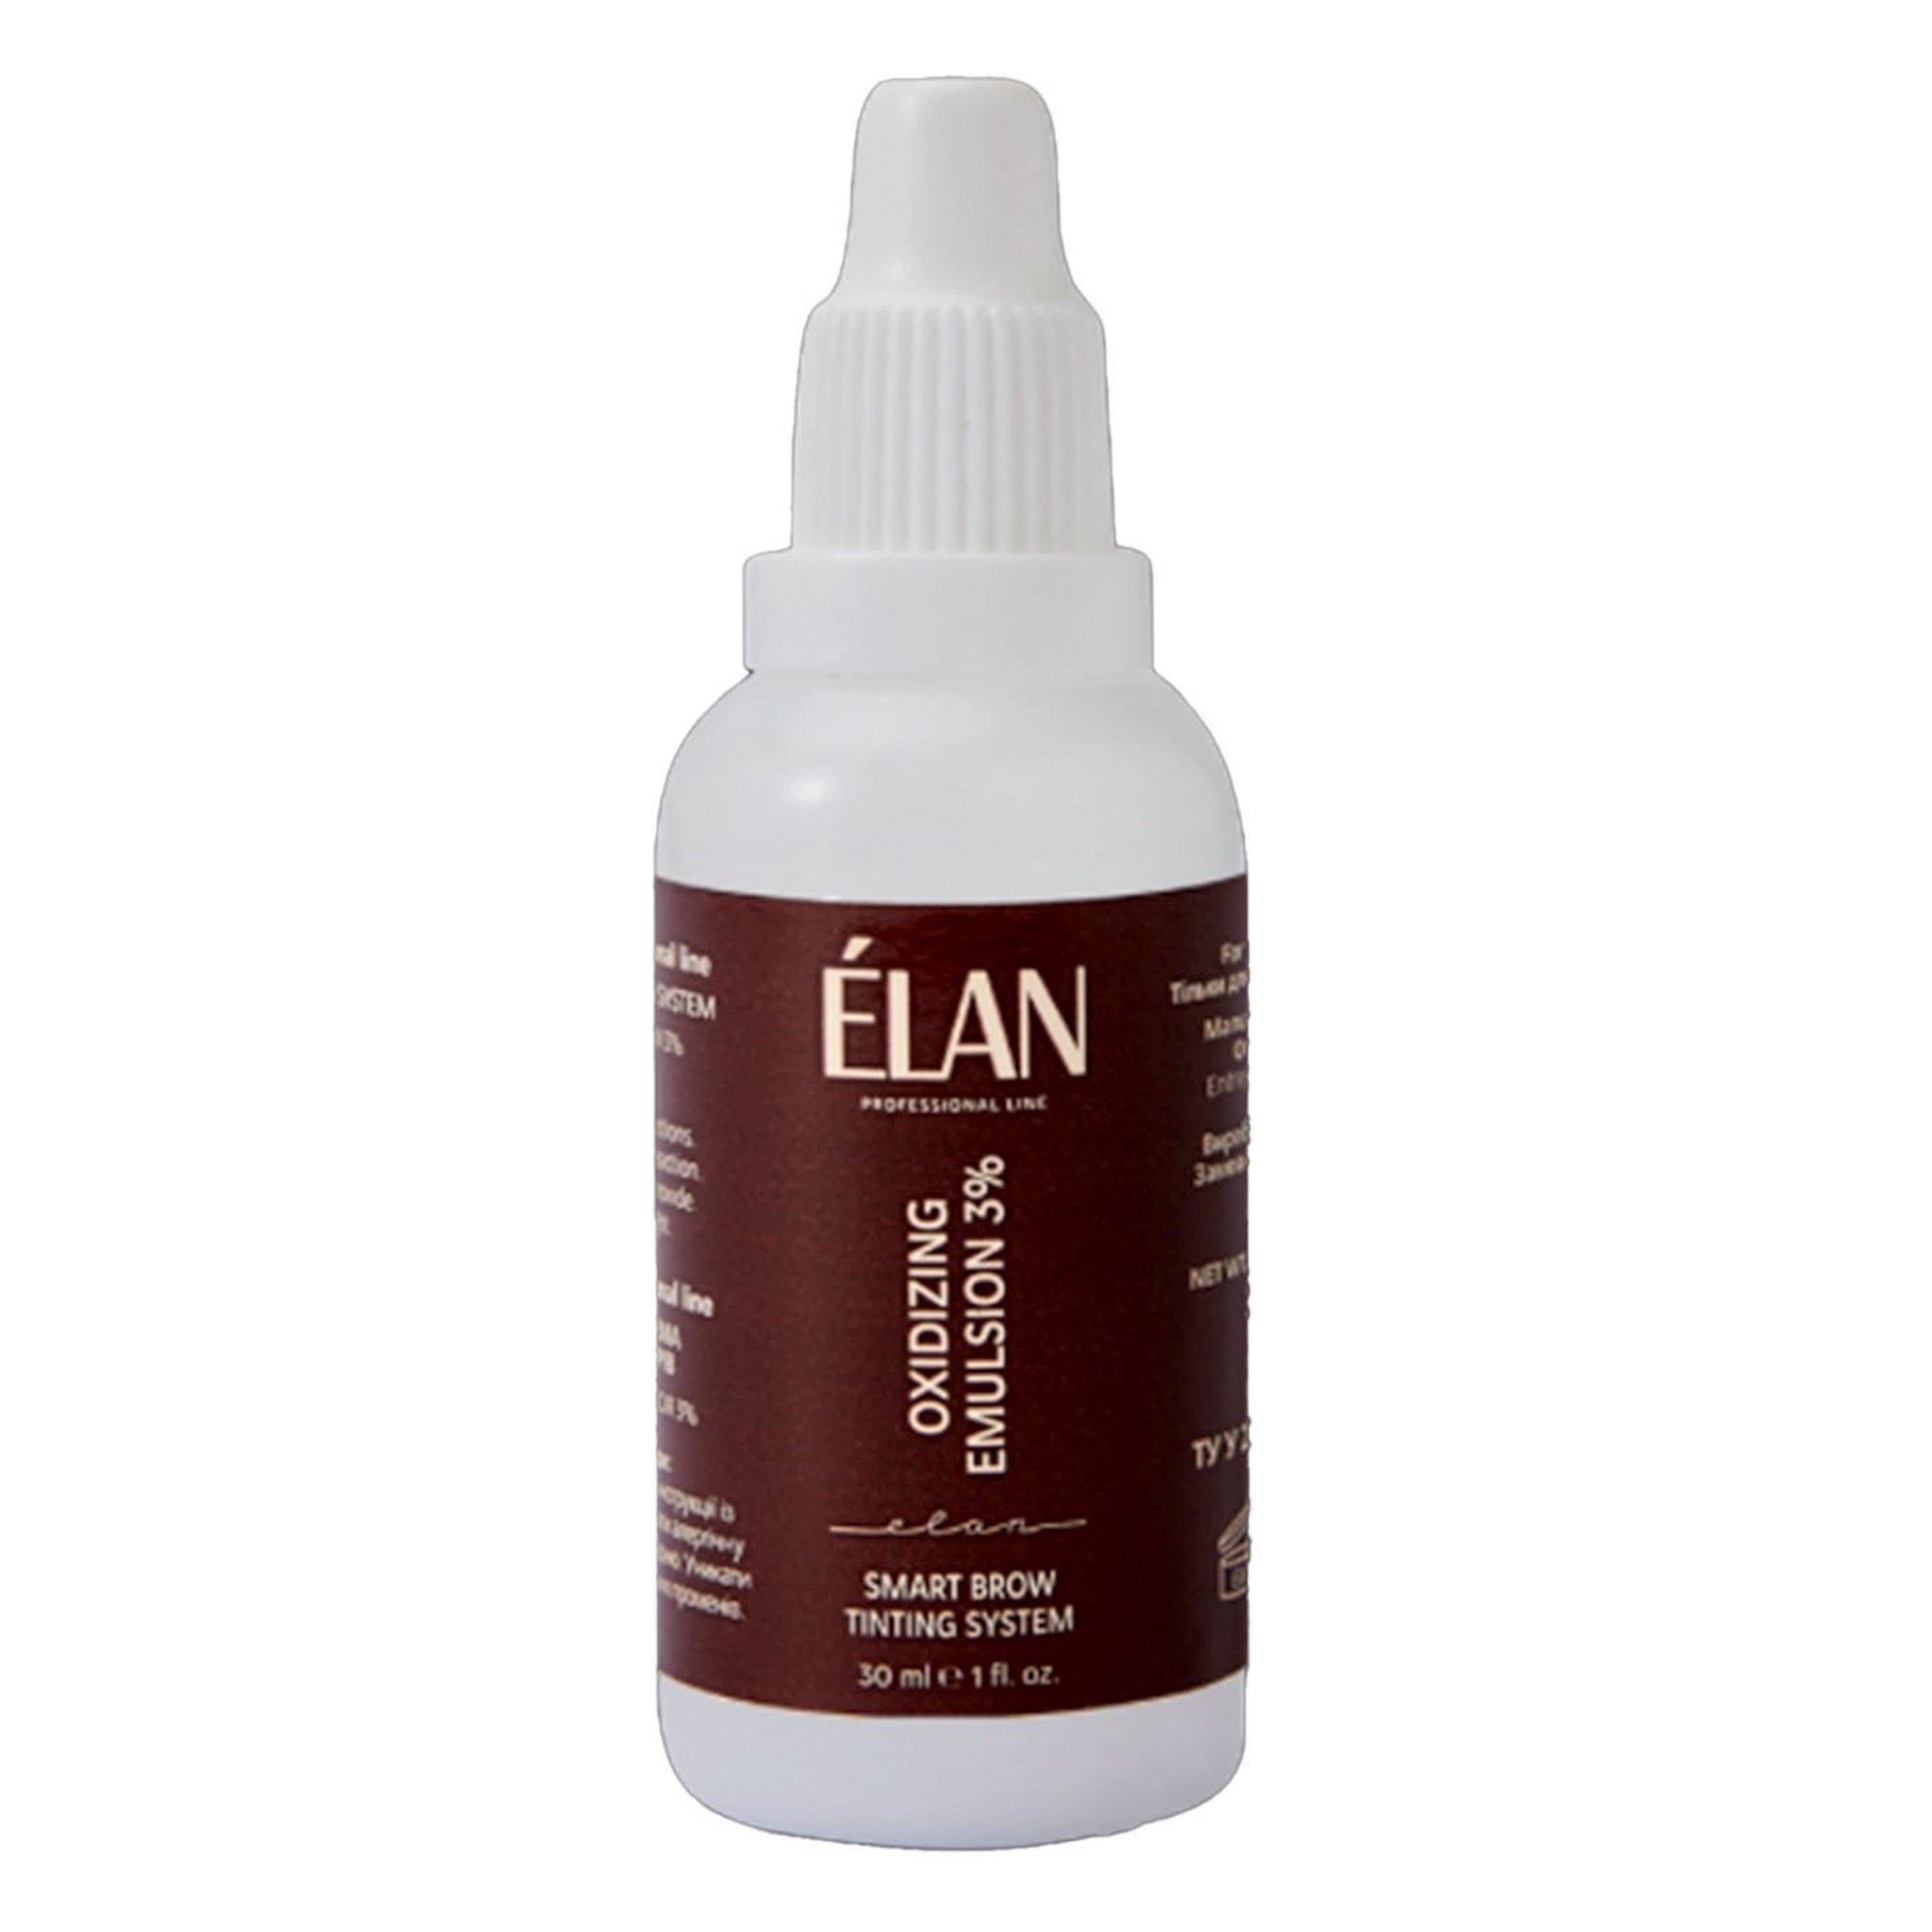 ELAN Smart Brow Tinting System - Oxidizing Emulsion 3% - The Beauty House Shop